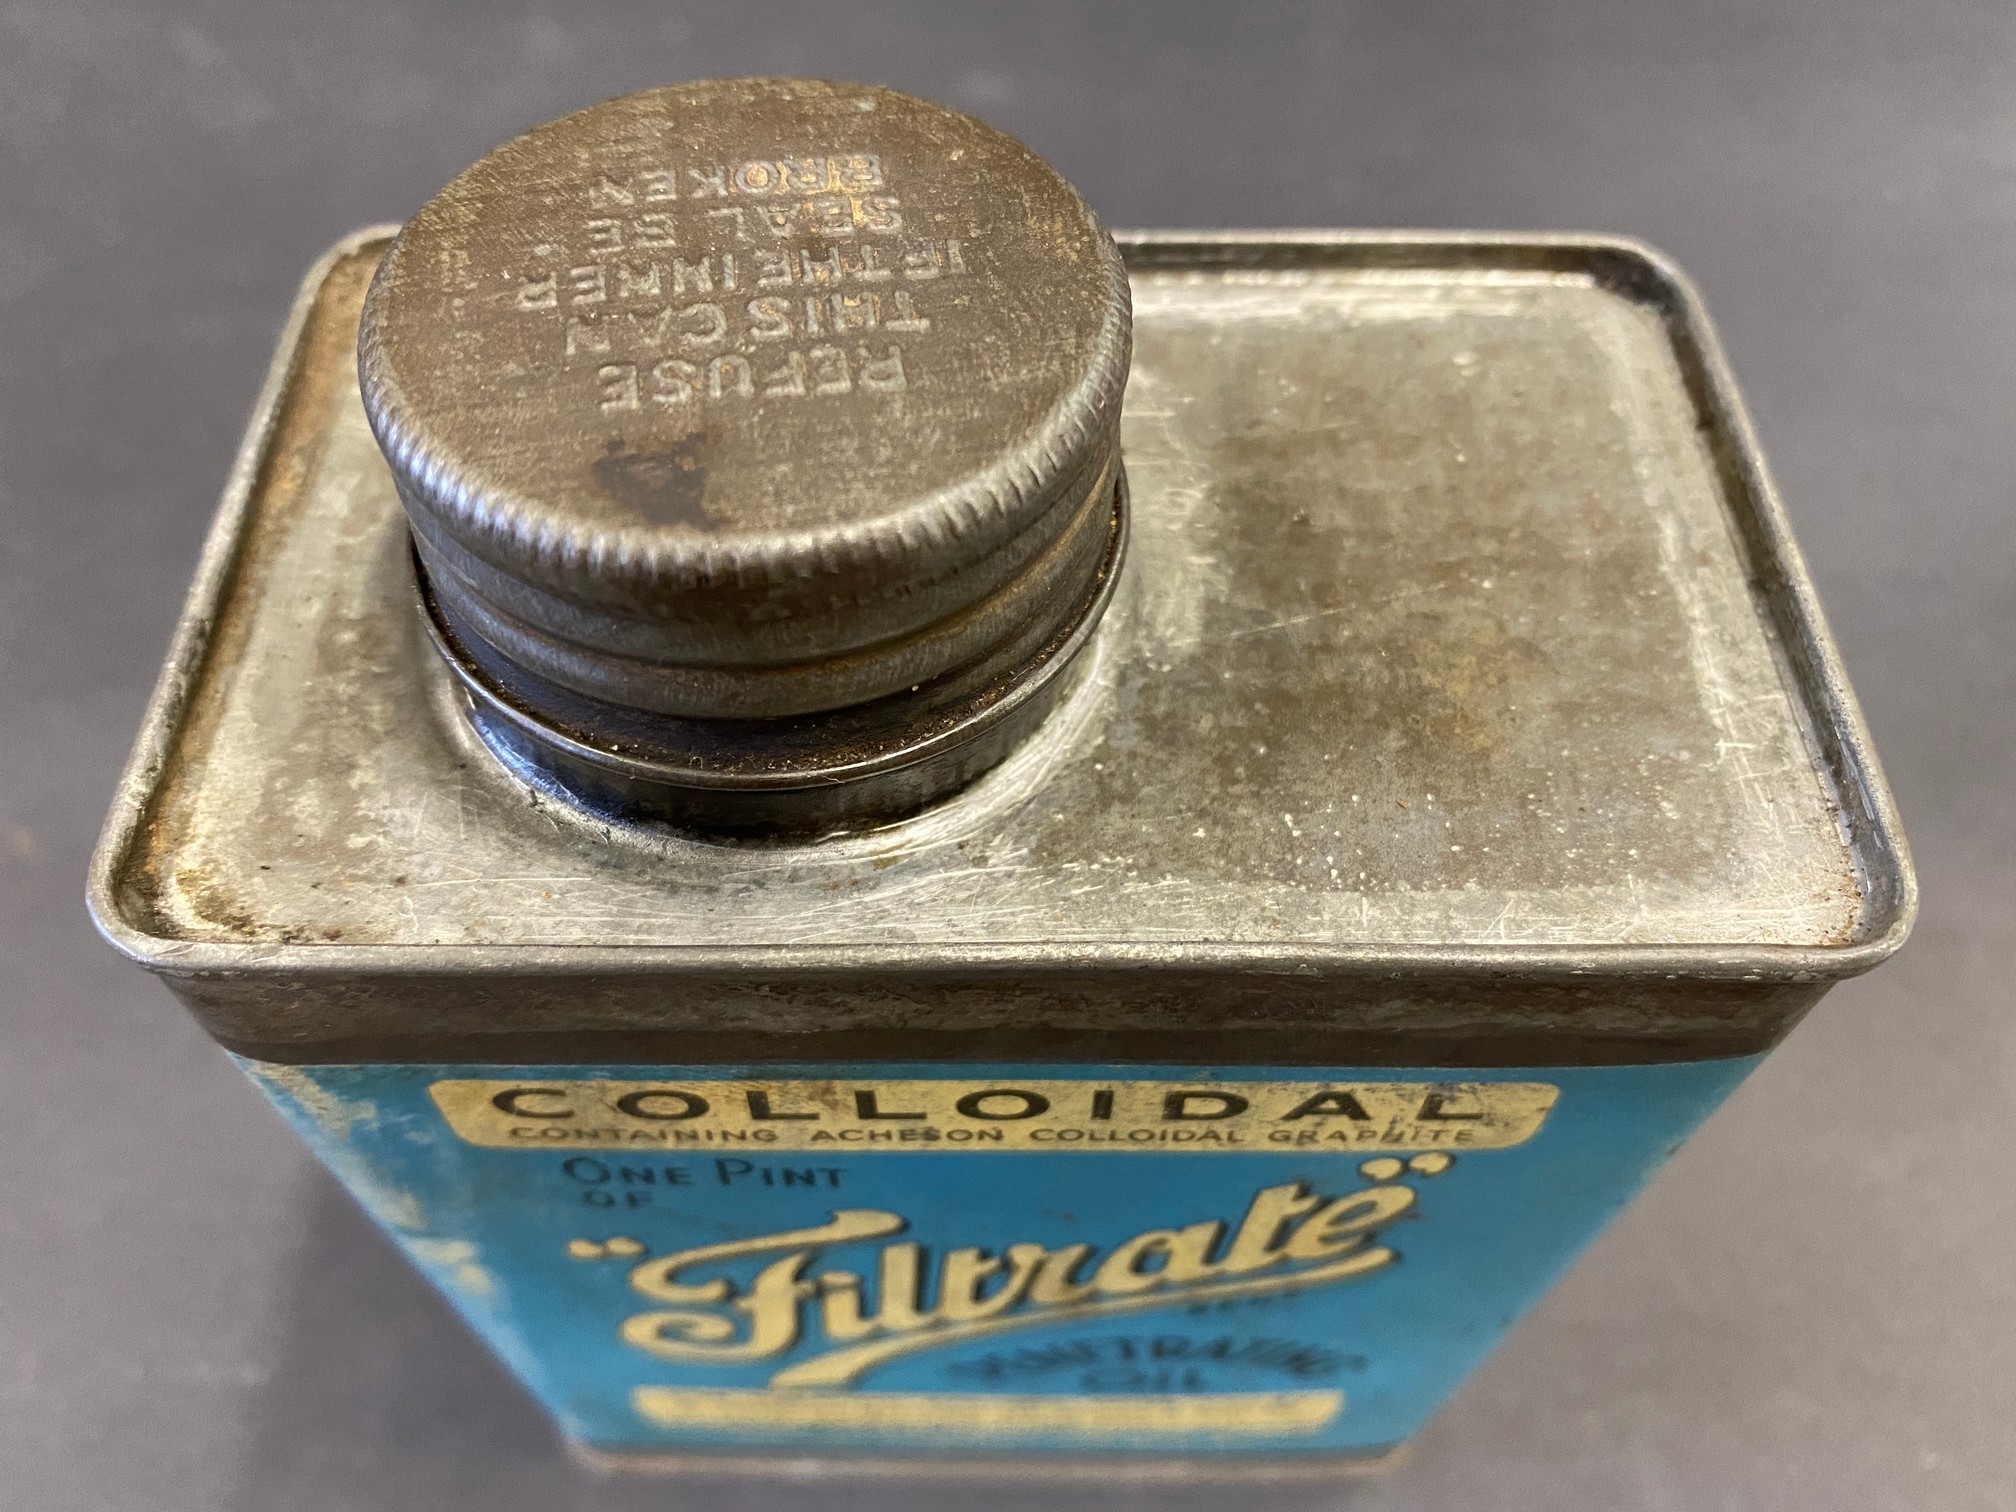 A Filtrate Penetrating Oil rectangular pint can. - Image 3 of 4